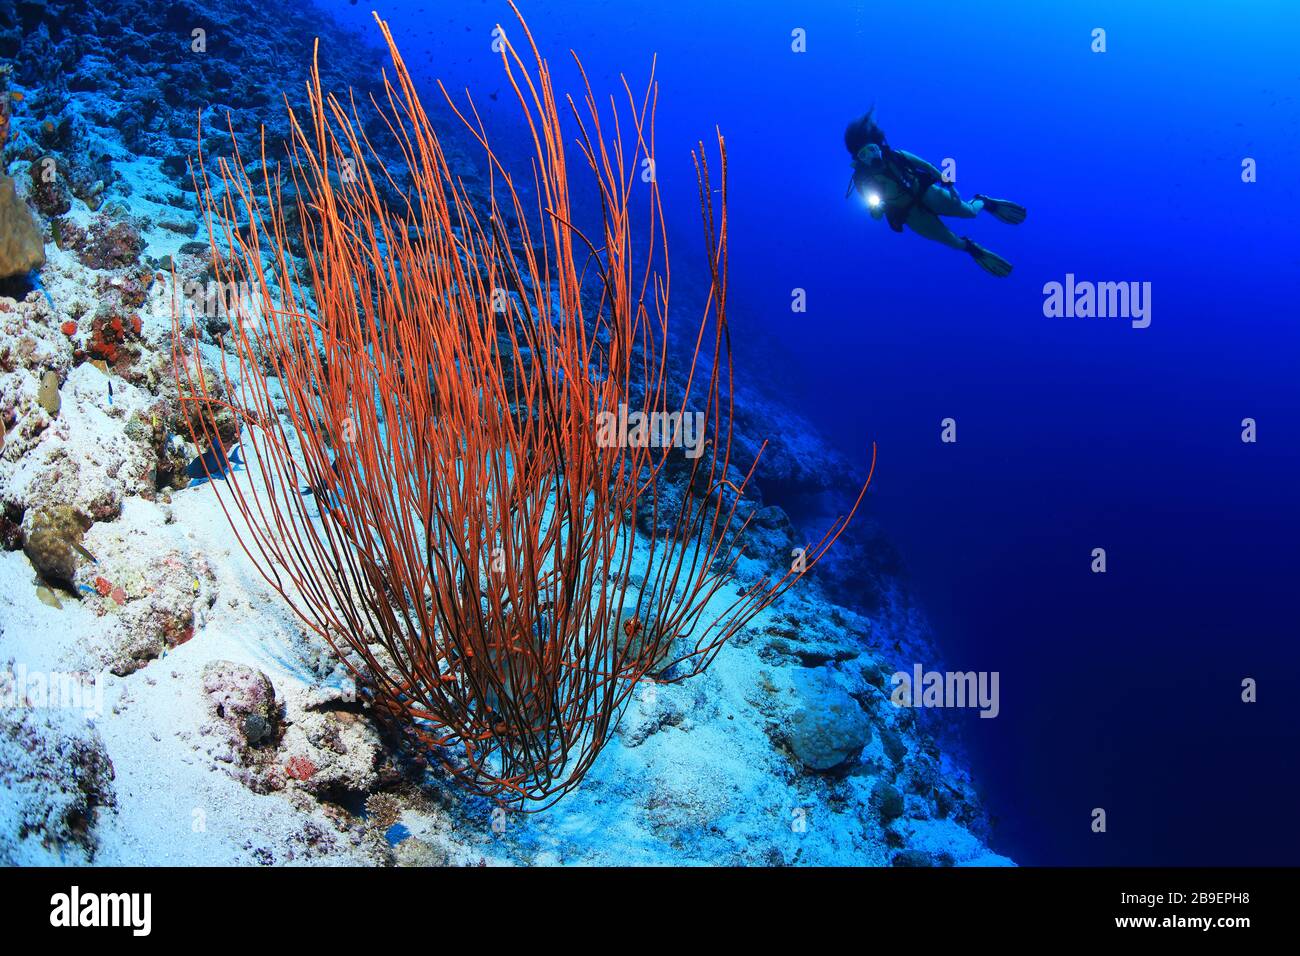 Sea whip coral (Ellisella ceratophyta) and scuba diver underwater in the coral reef of the Maldives Stock Photo